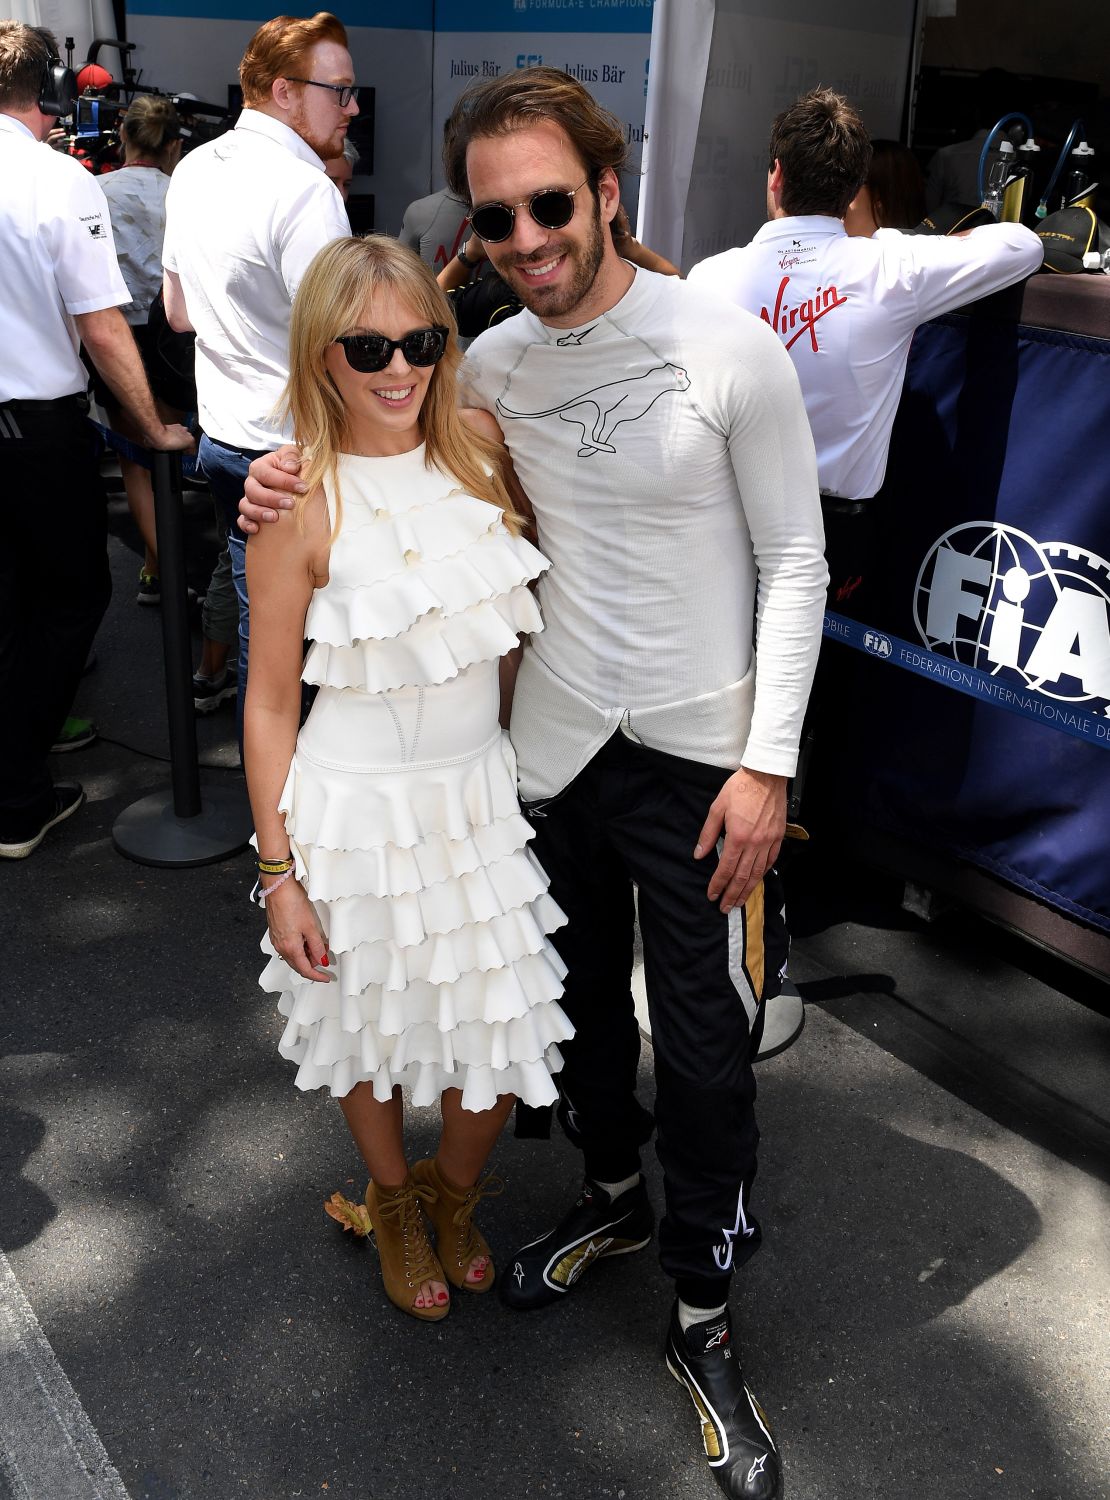 Kylie Minogue shares a moment with Jean-Eric Vergne of France ahead of the fourth round of the FIA Formula E championship in Santiago.  